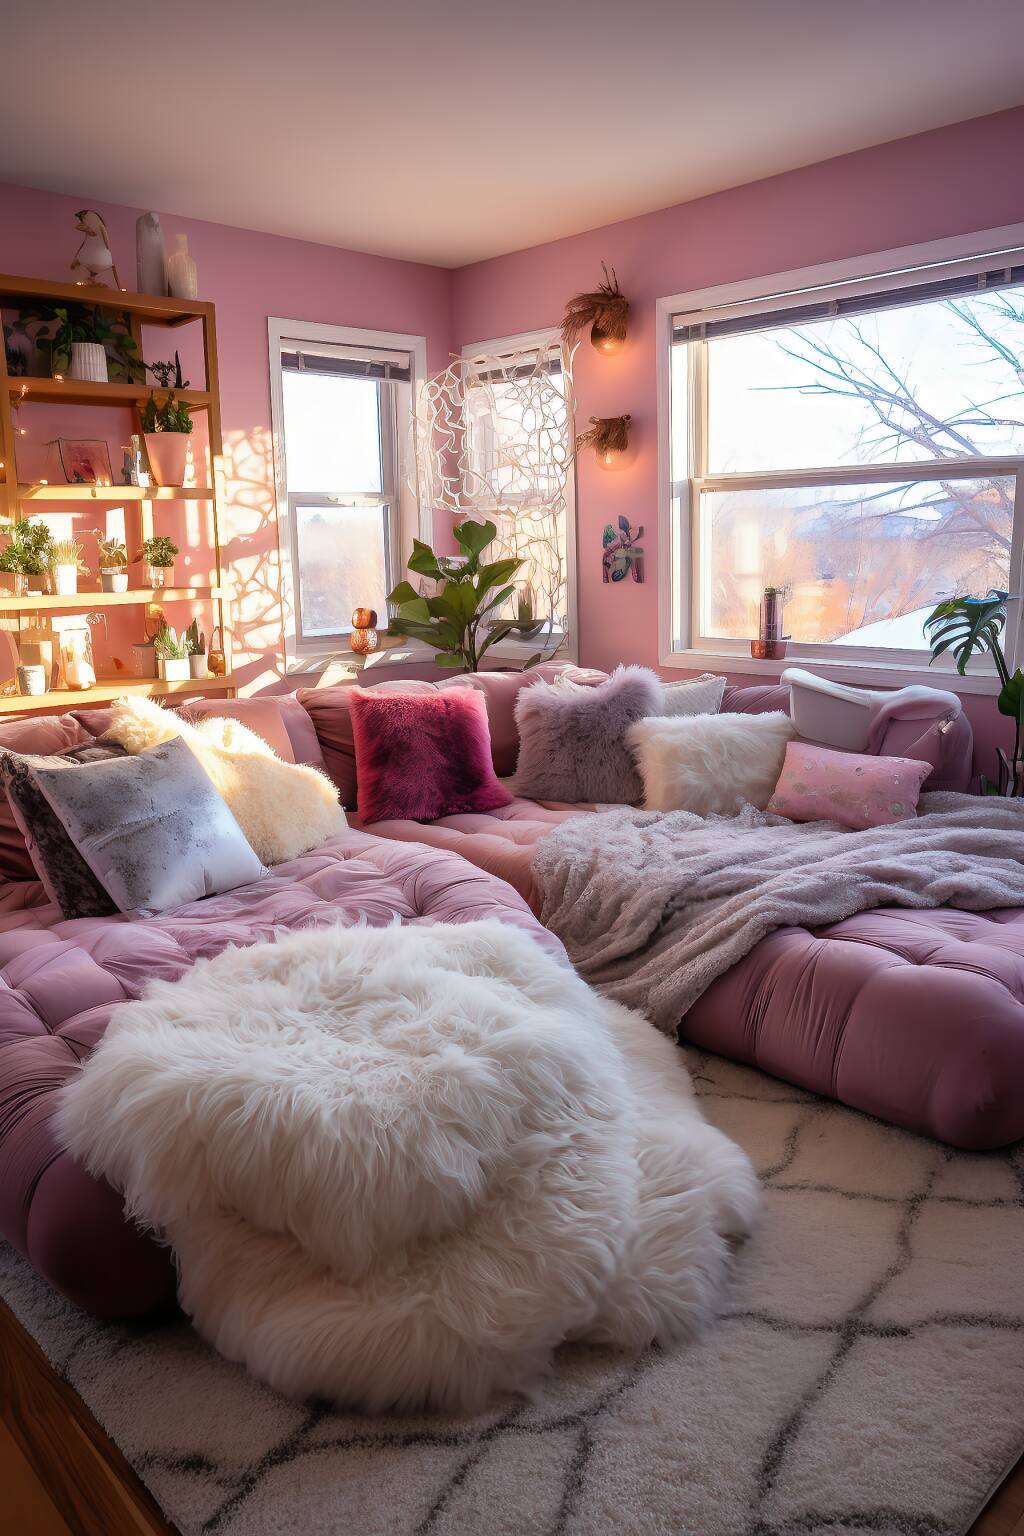 A Cozy, Romantic Bohemian Living Room With Plush Pink Seating, Soft Textures, And An Array Of Houseplants In A Warm, Sunlit Space.